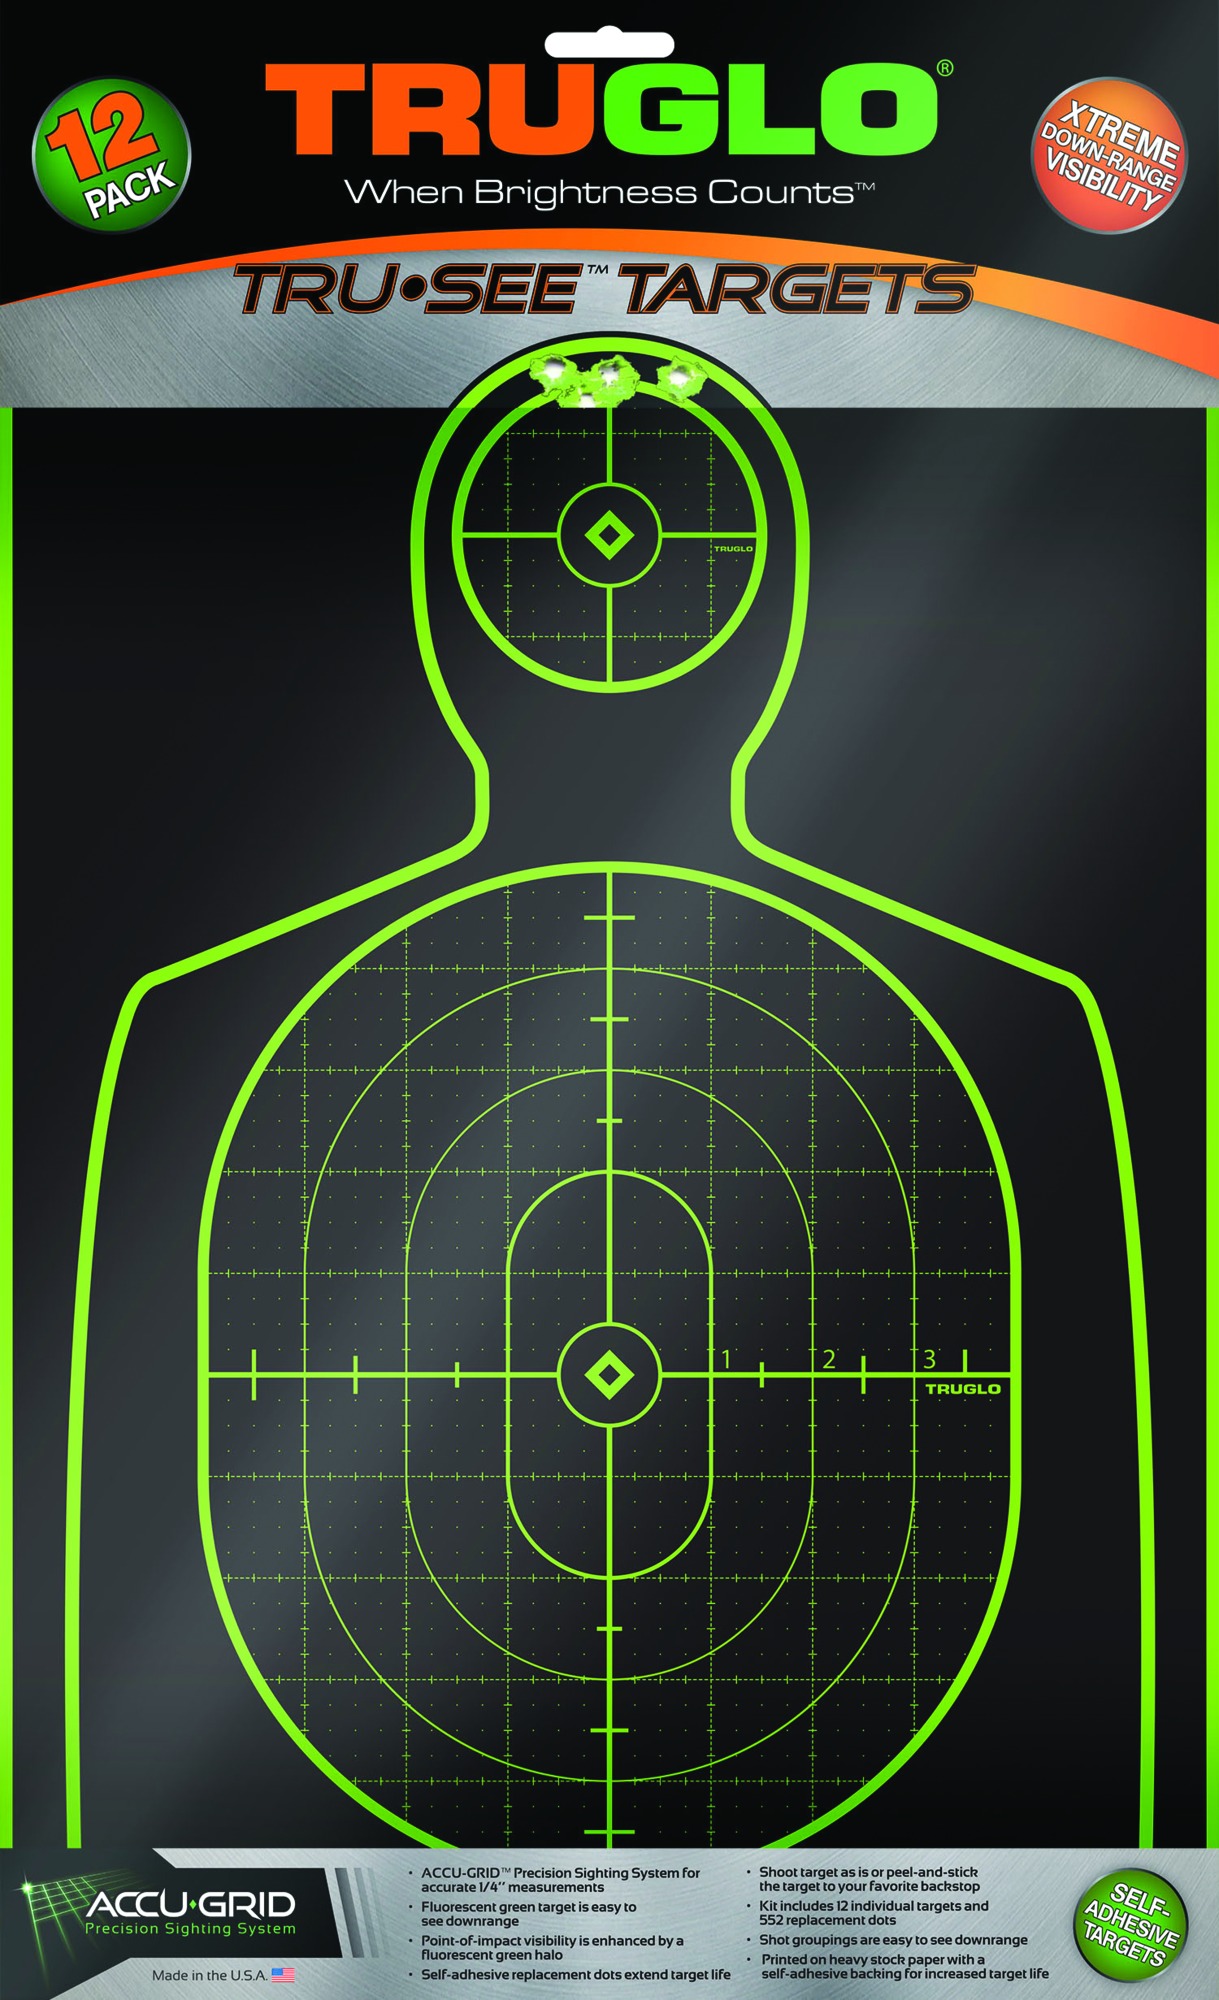 truglo true see target